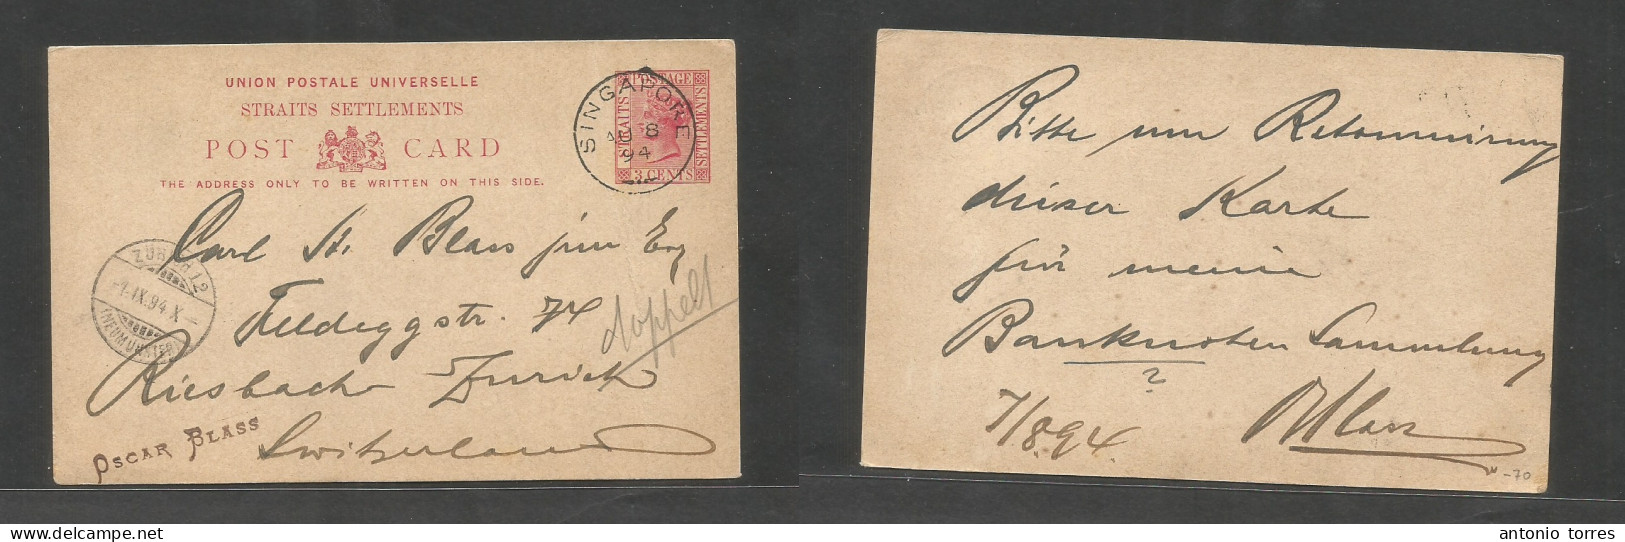 Straits Settlements Singapore. 1894 (8 Aug) Sing - Switzerland, Resbach (1 Sept) 3c Red QV Stat Card, Cds VF Used. - Singapore (1959-...)